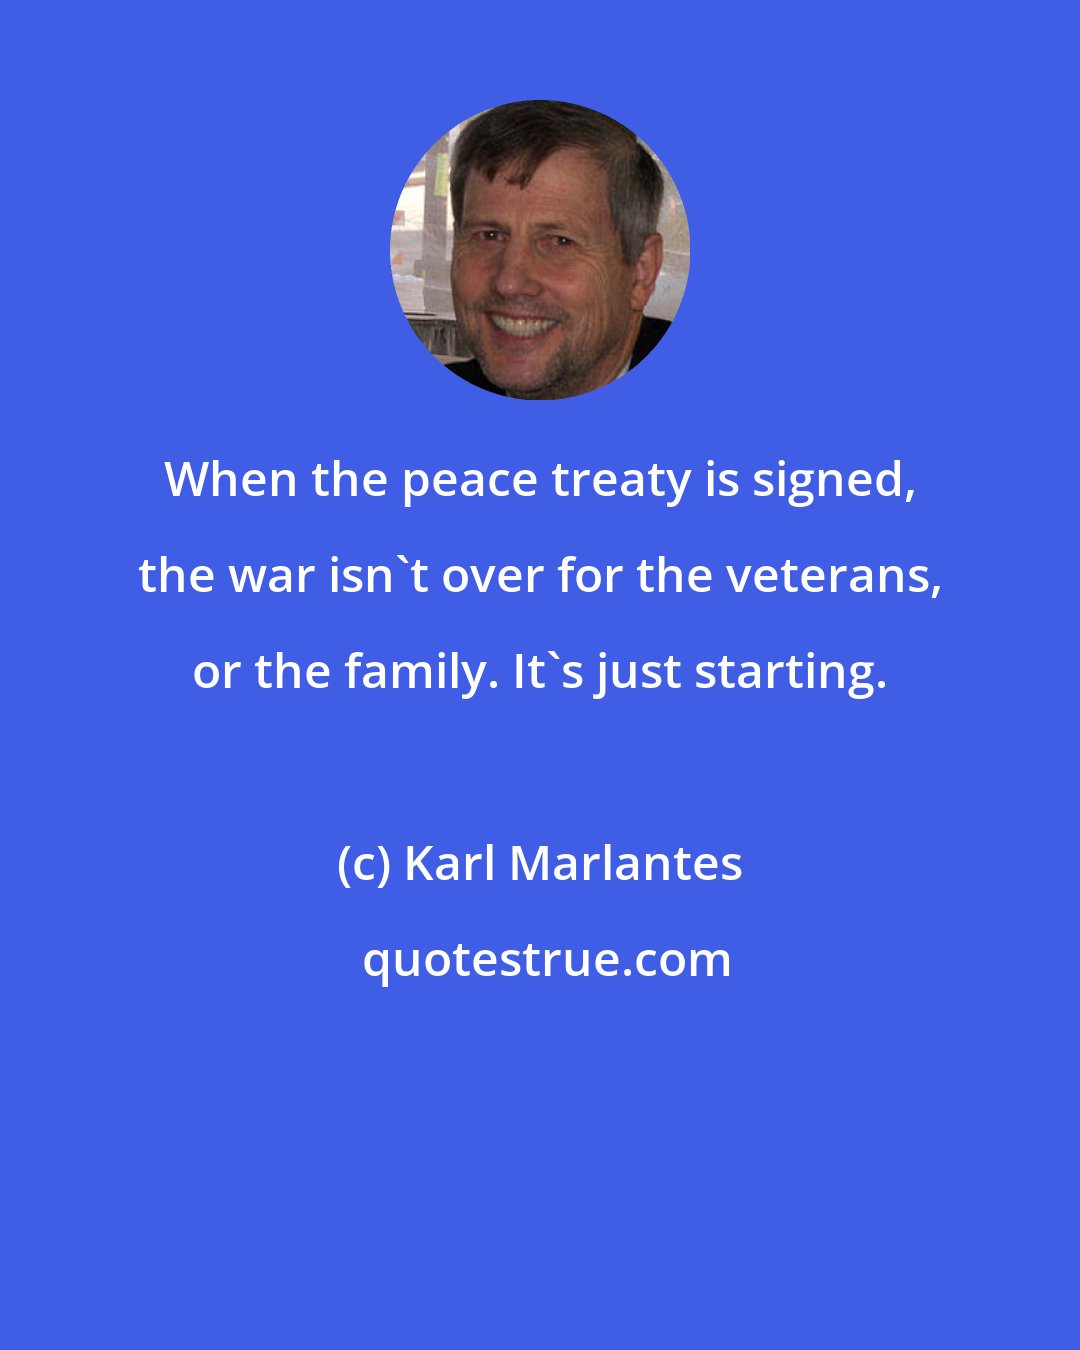 Karl Marlantes: When the peace treaty is signed, the war isn't over for the veterans, or the family. It's just starting.